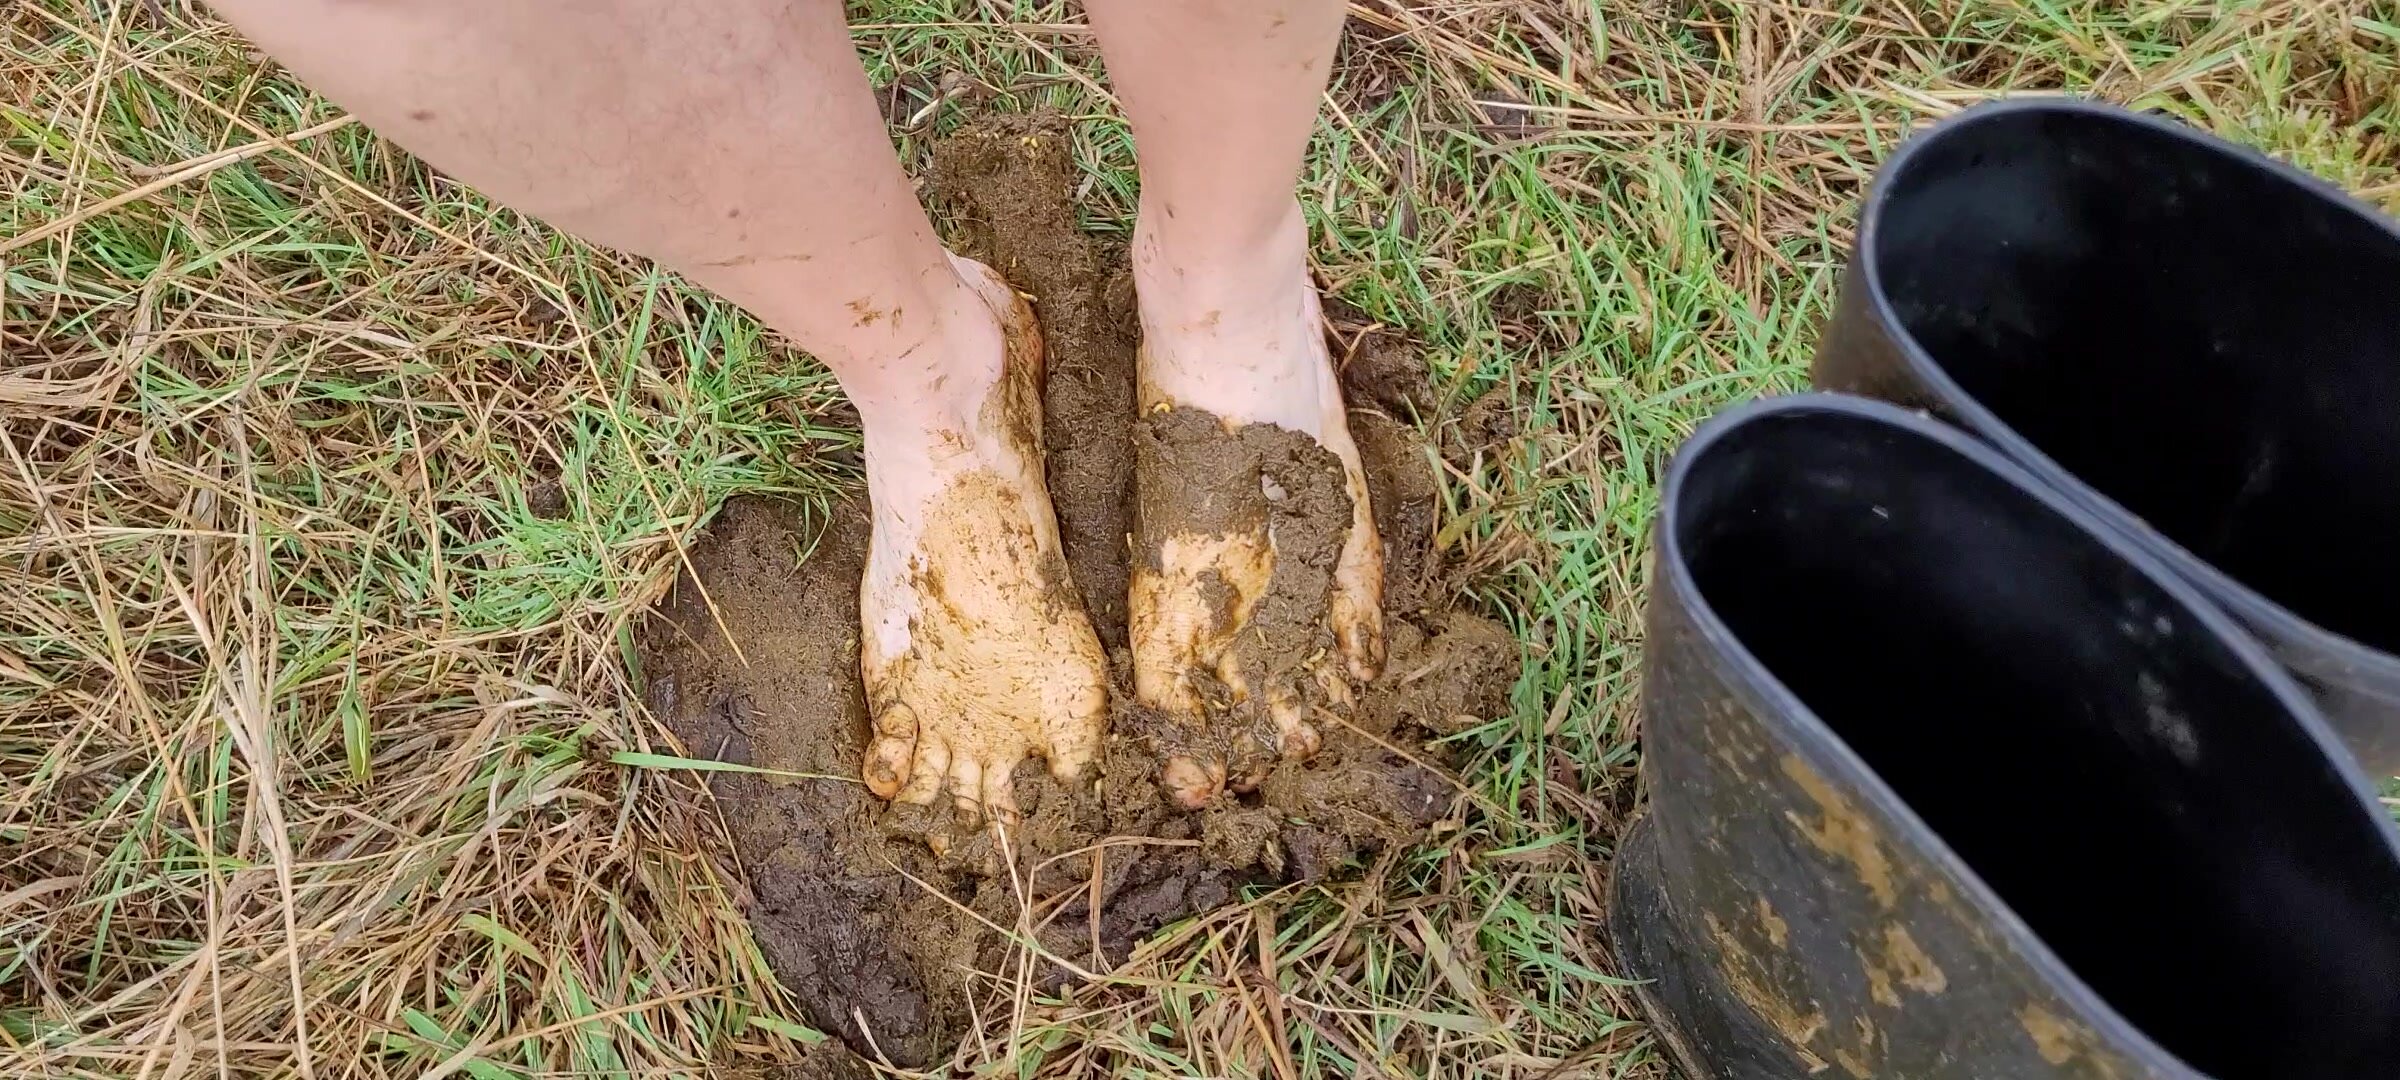 Boots and feet in cowshit 2